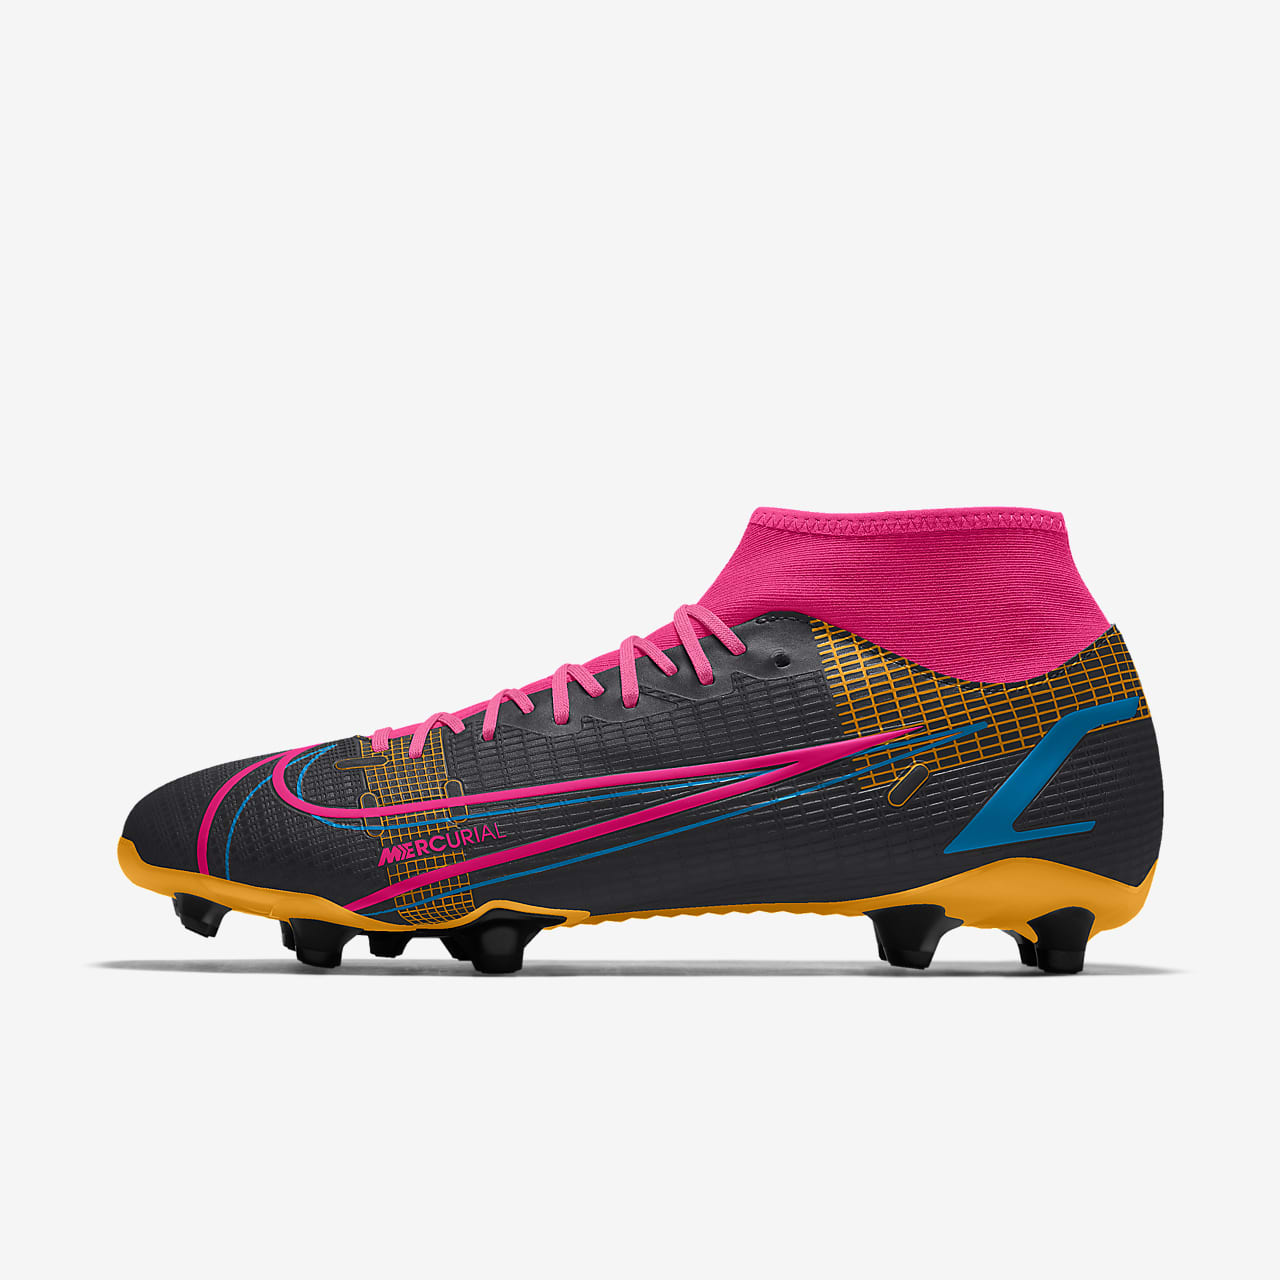 Chaussure de football à crampons personnalisable Nike Mercurial Superfly 8 Academy By You